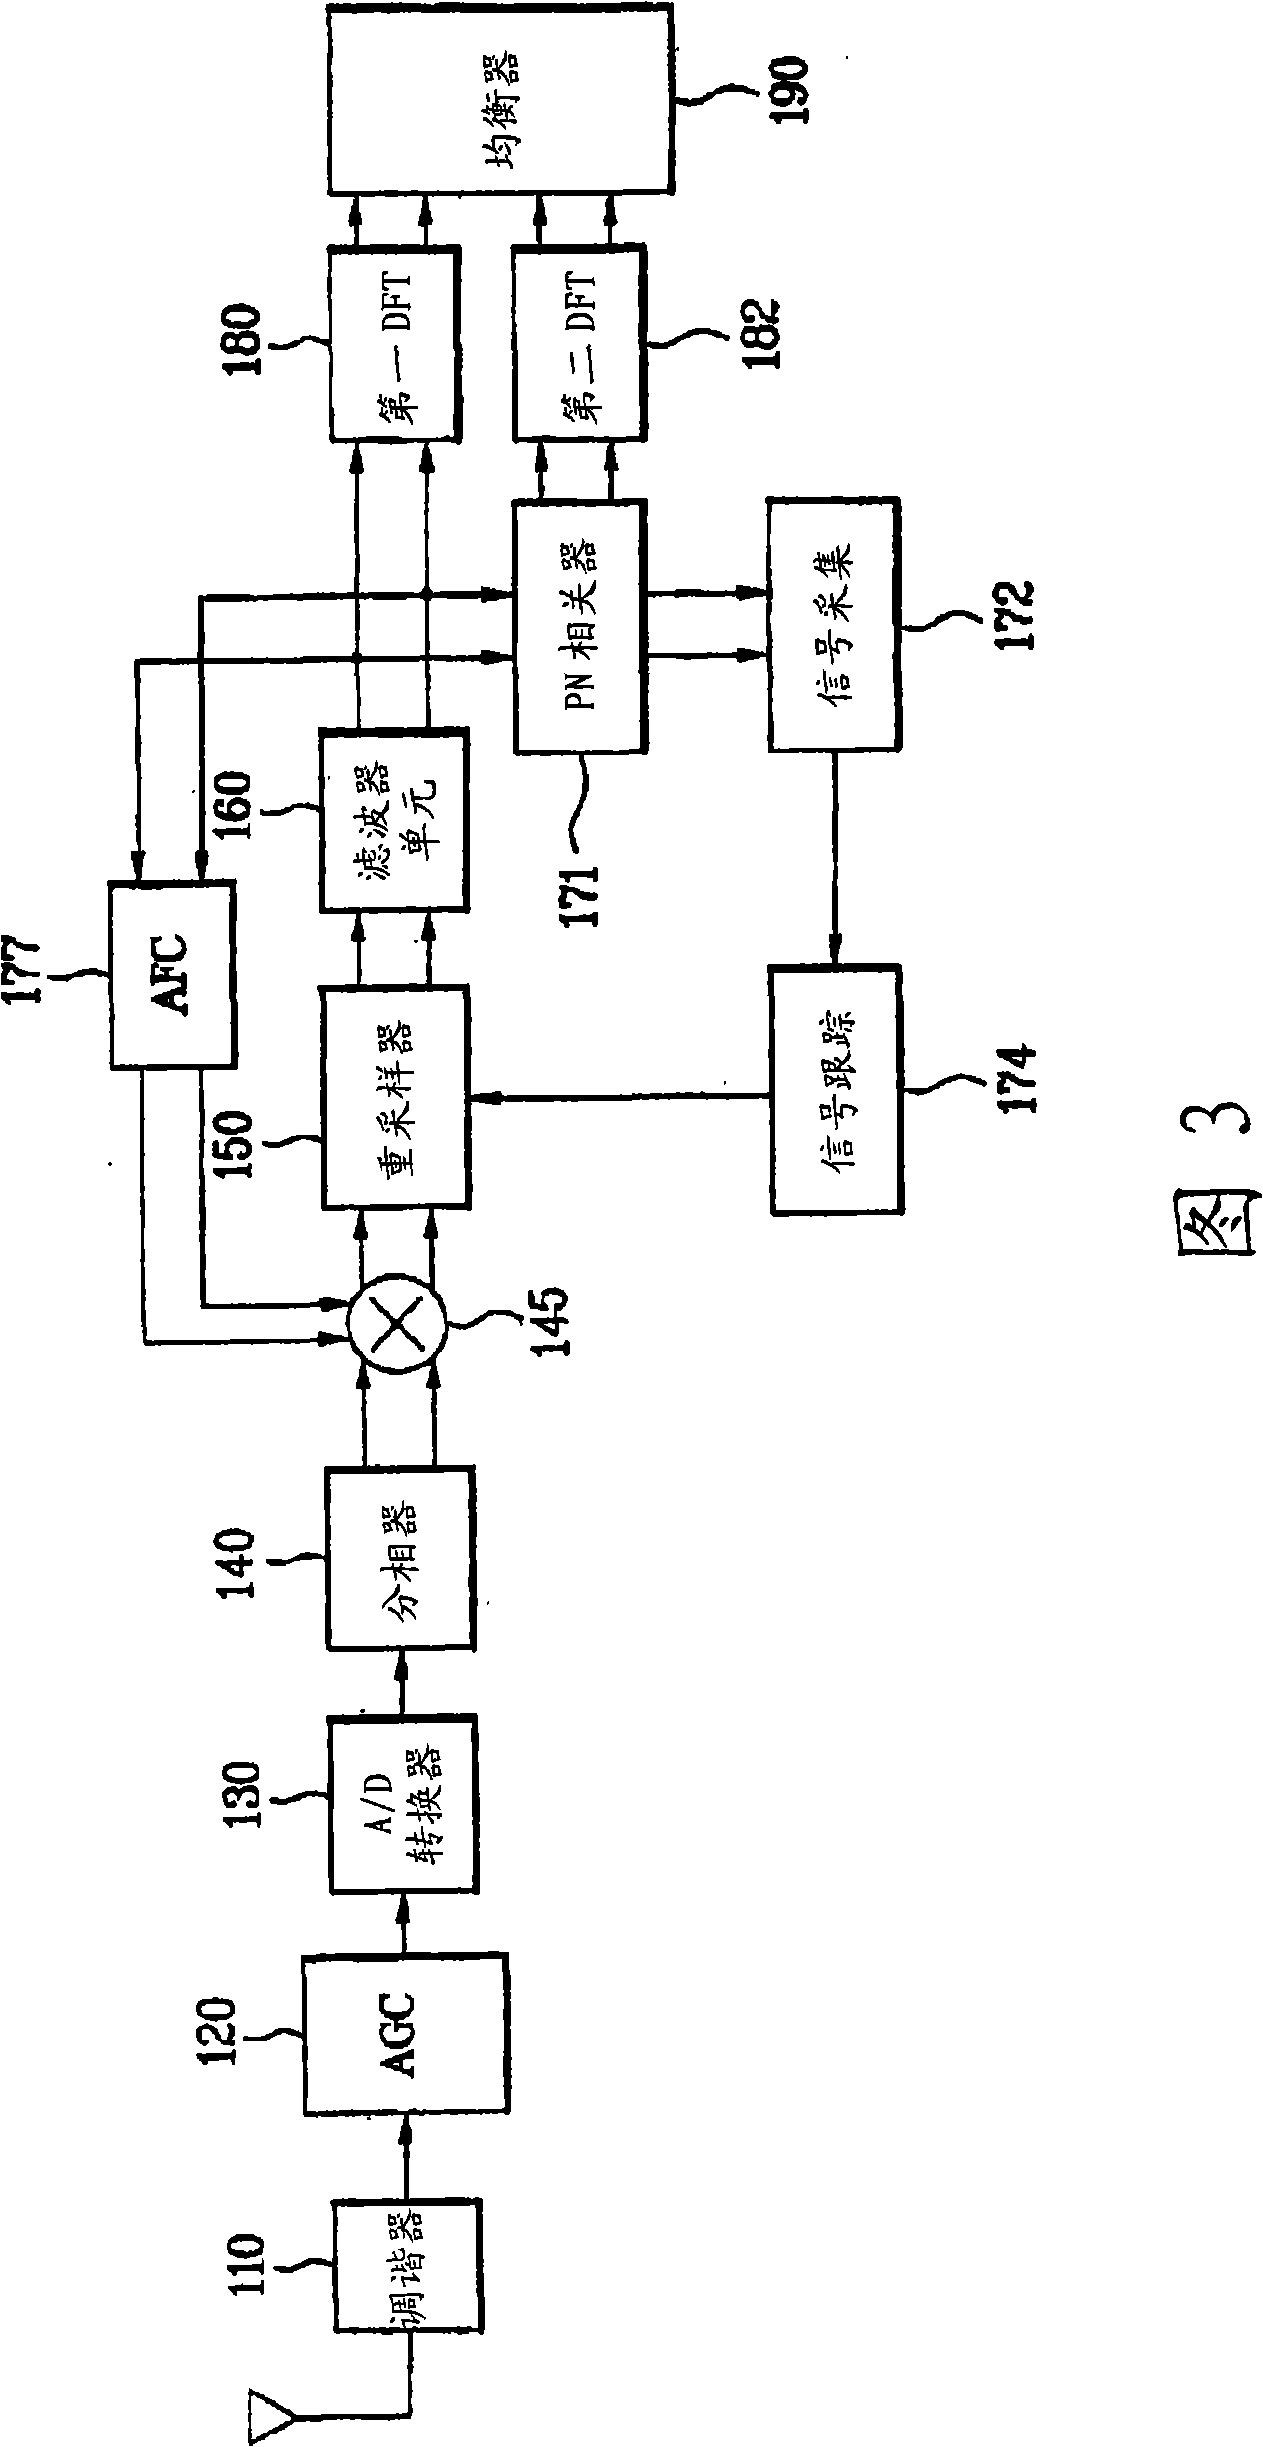 Apparatus for receiving a signal of orthogonal frequency division multiplexing